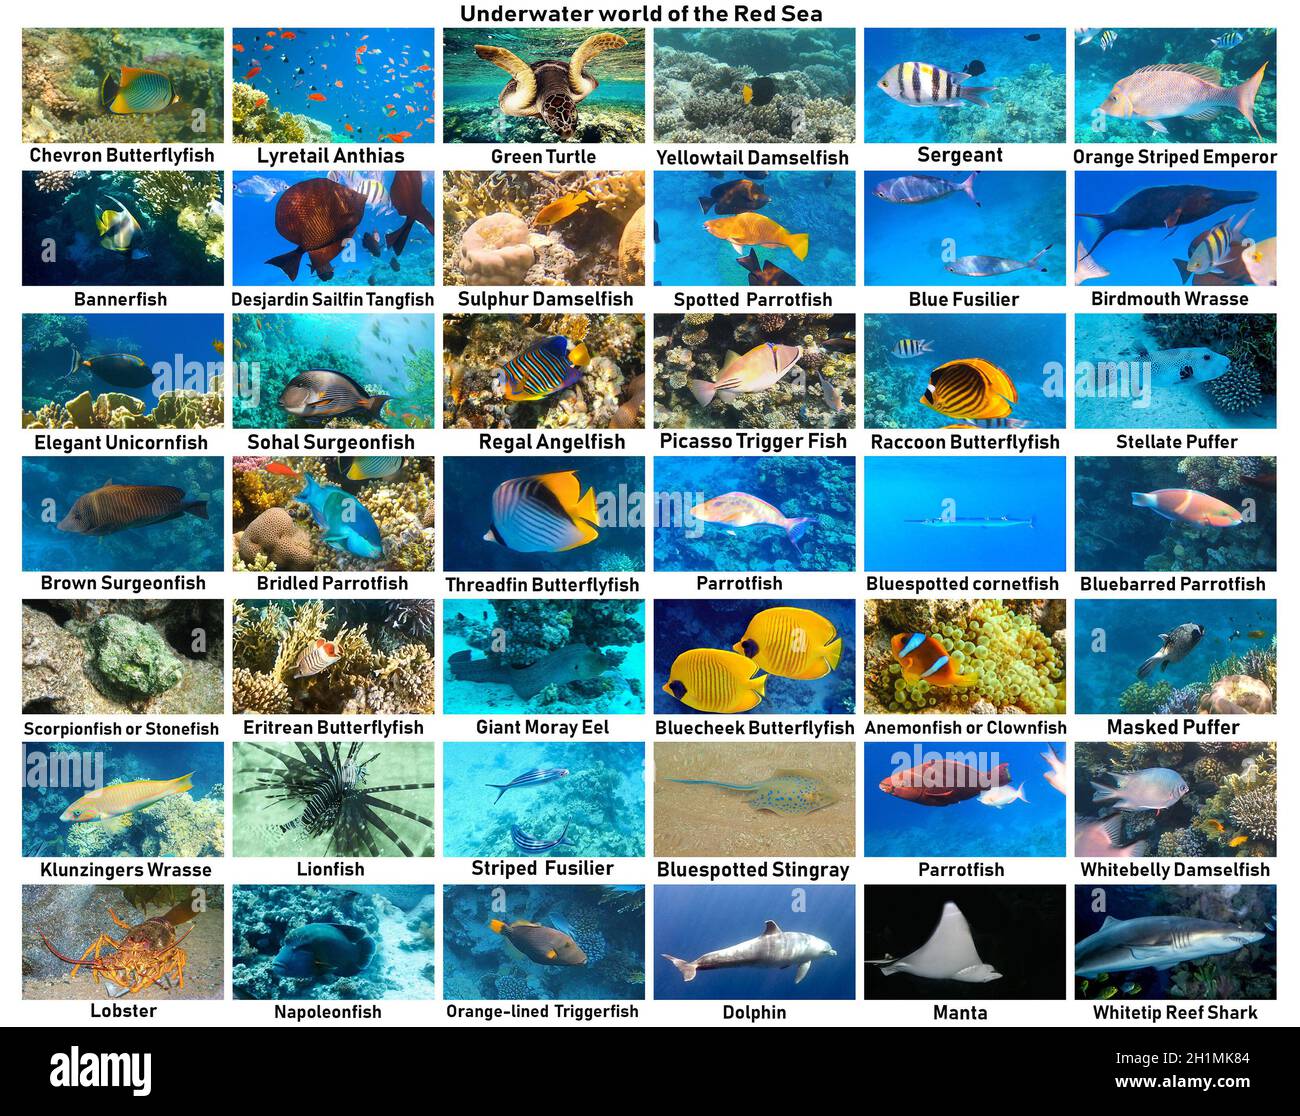 Emuler religion Diktere The underwater atlas or marine life identification guide. Collection of  tropical fishes. Catalog from coral fish at Red Sea - Picasso Trigger Fish,  gr Stock Photo - Alamy